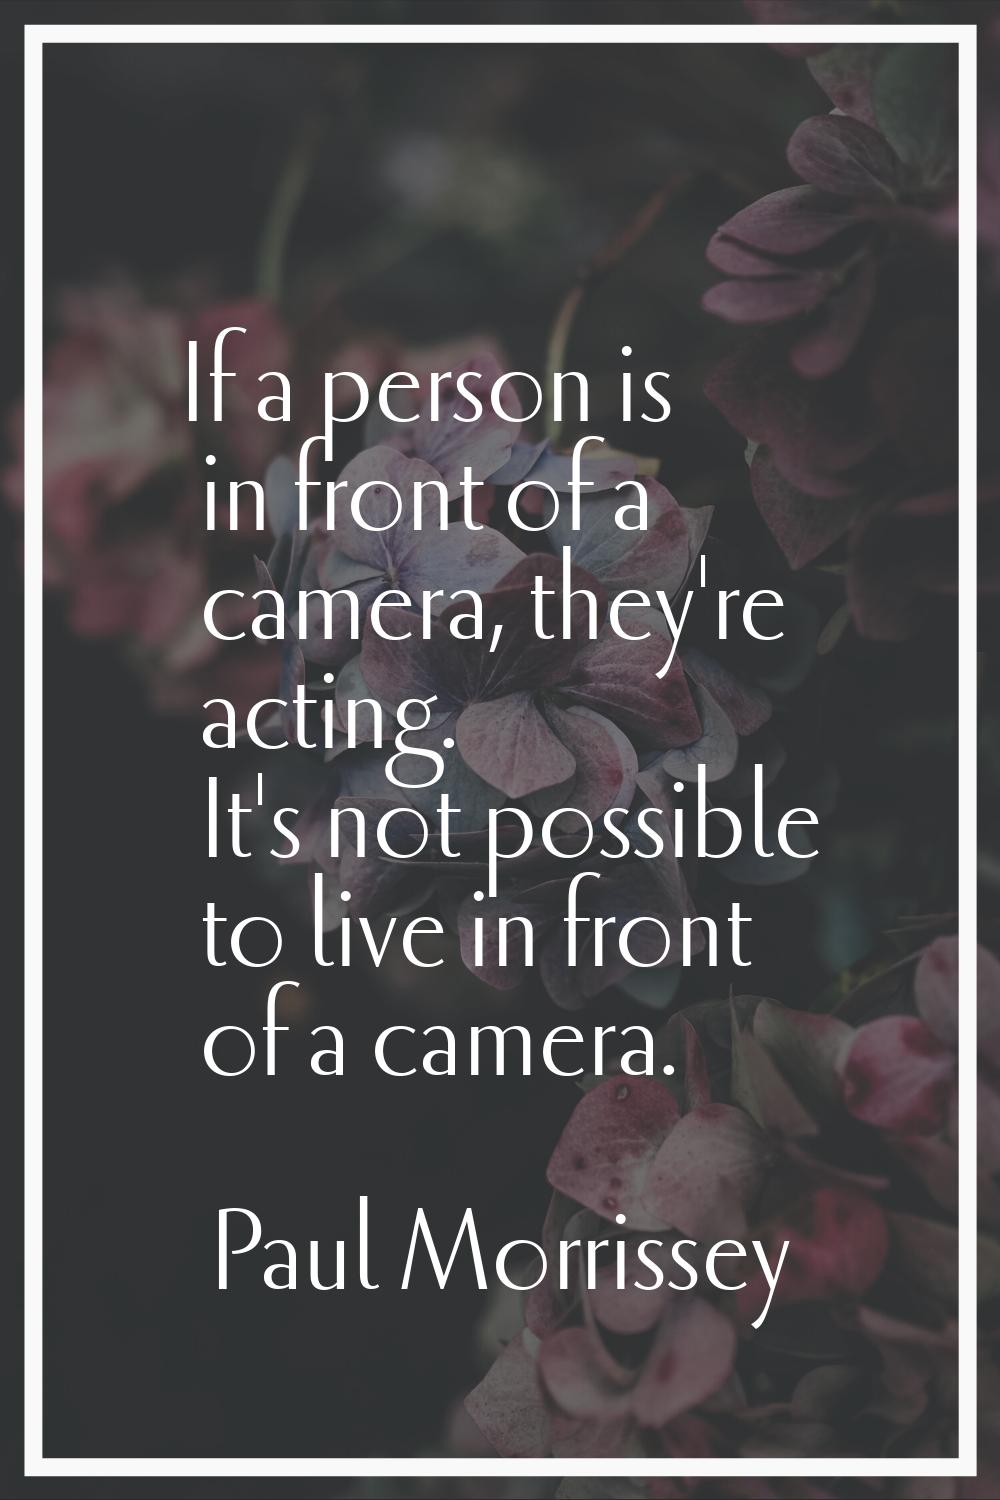 If a person is in front of a camera, they're acting. It's not possible to live in front of a camera